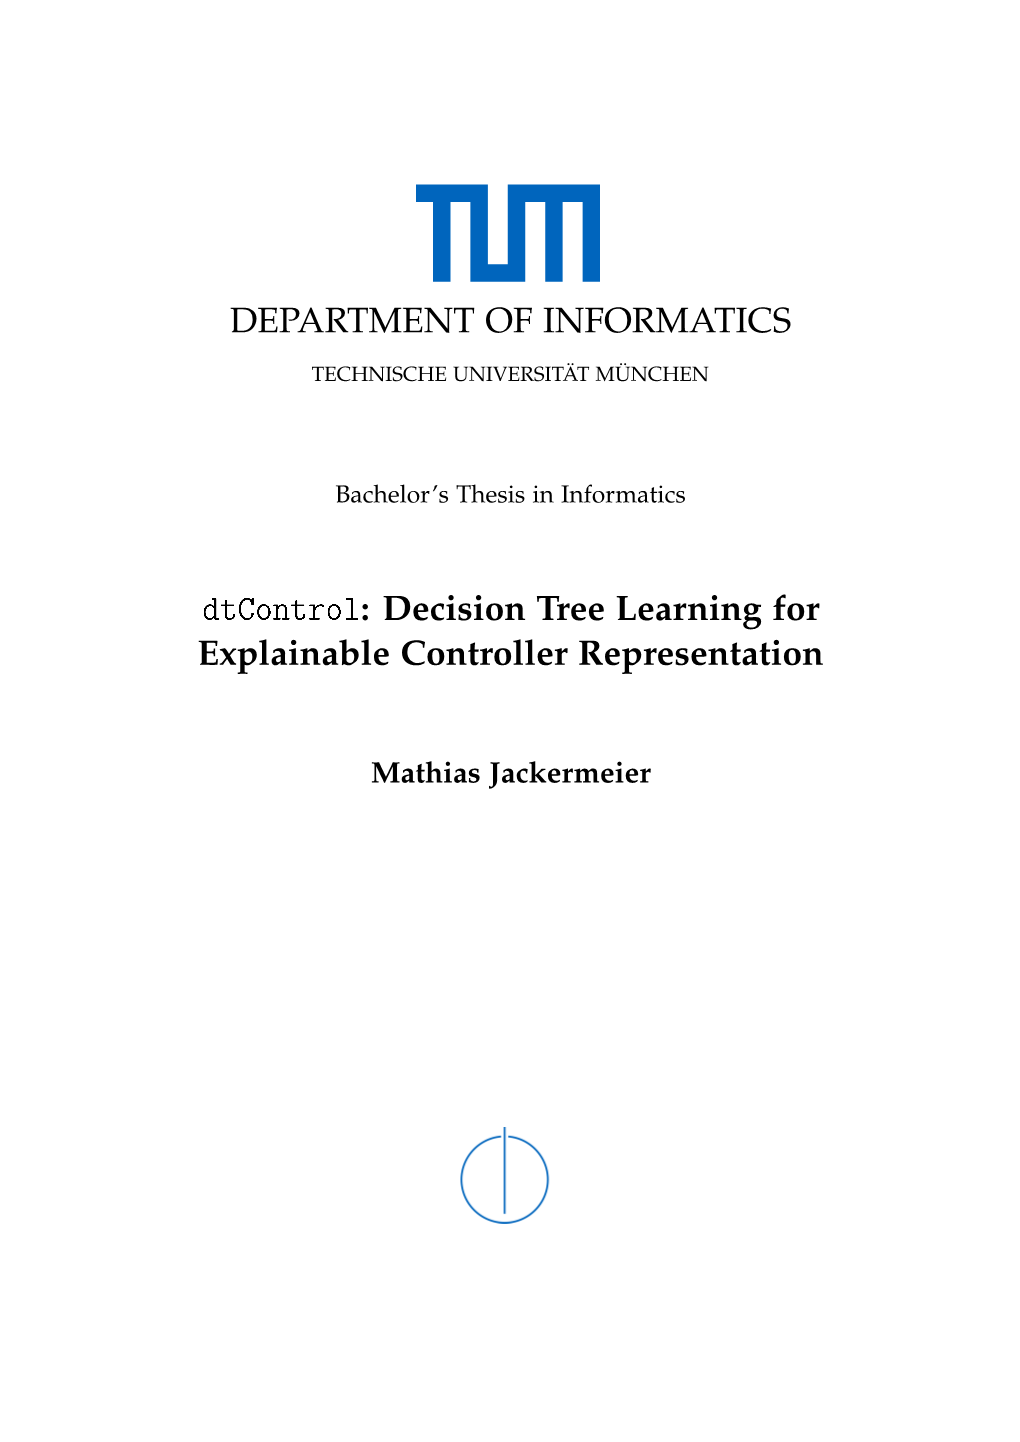 DEPARTMENT of INFORMATICS Dtcontrol: Decision Tree Learning